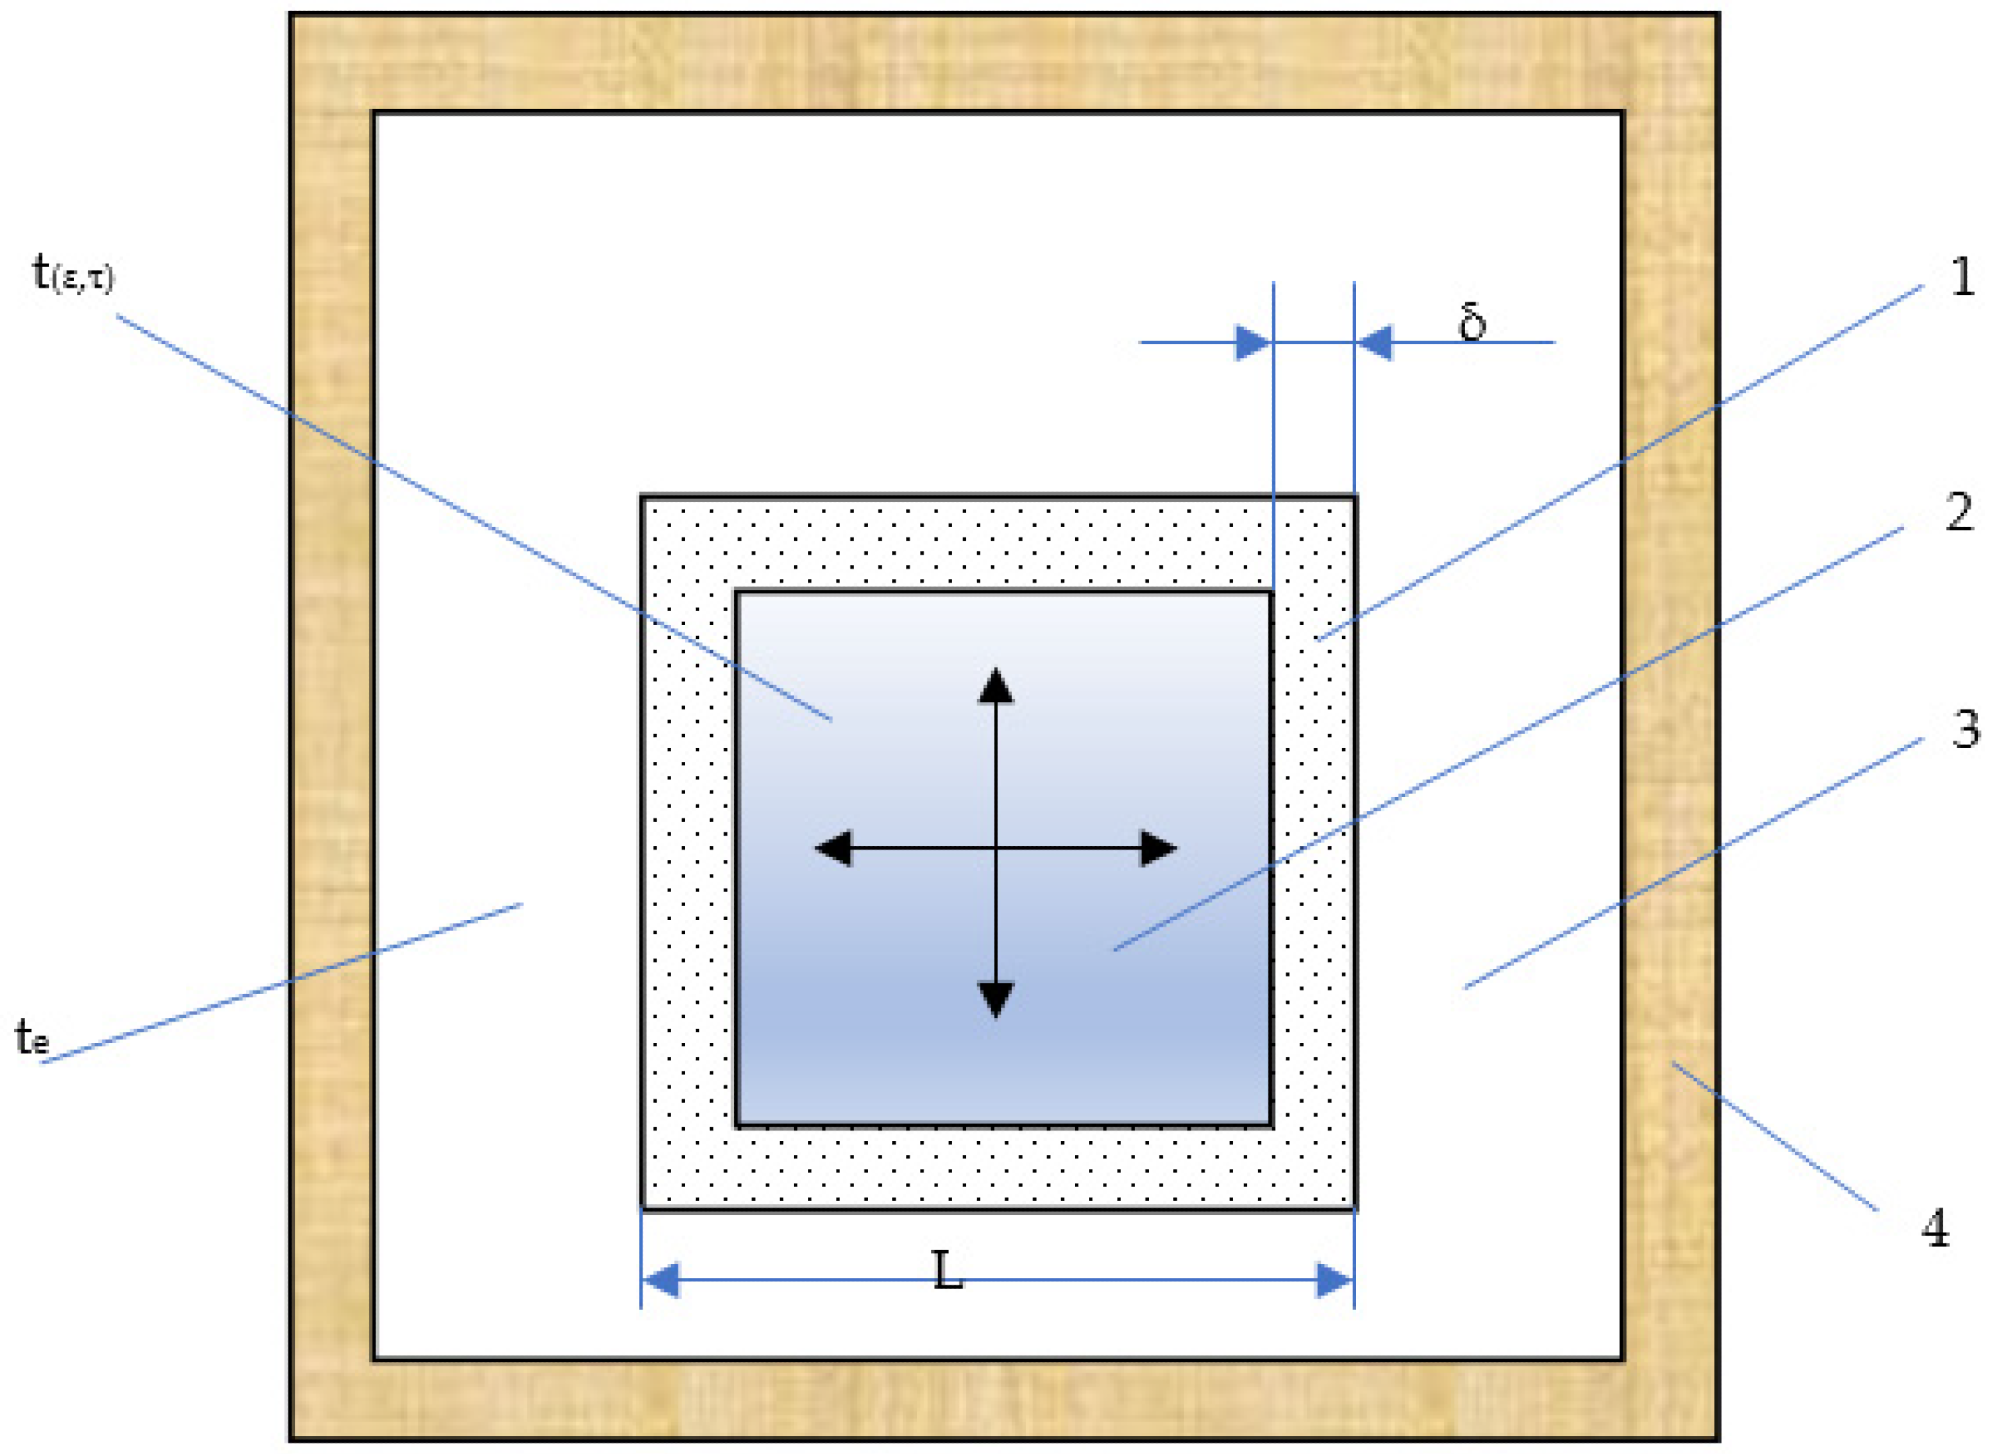 Product cube freezing model: 1—frozen layer, 2—layer of the product that will be frozen, and which has an initial temperature, 3—cooling air, 4—thermal insulation of a mechanized device for small-piece freezing.